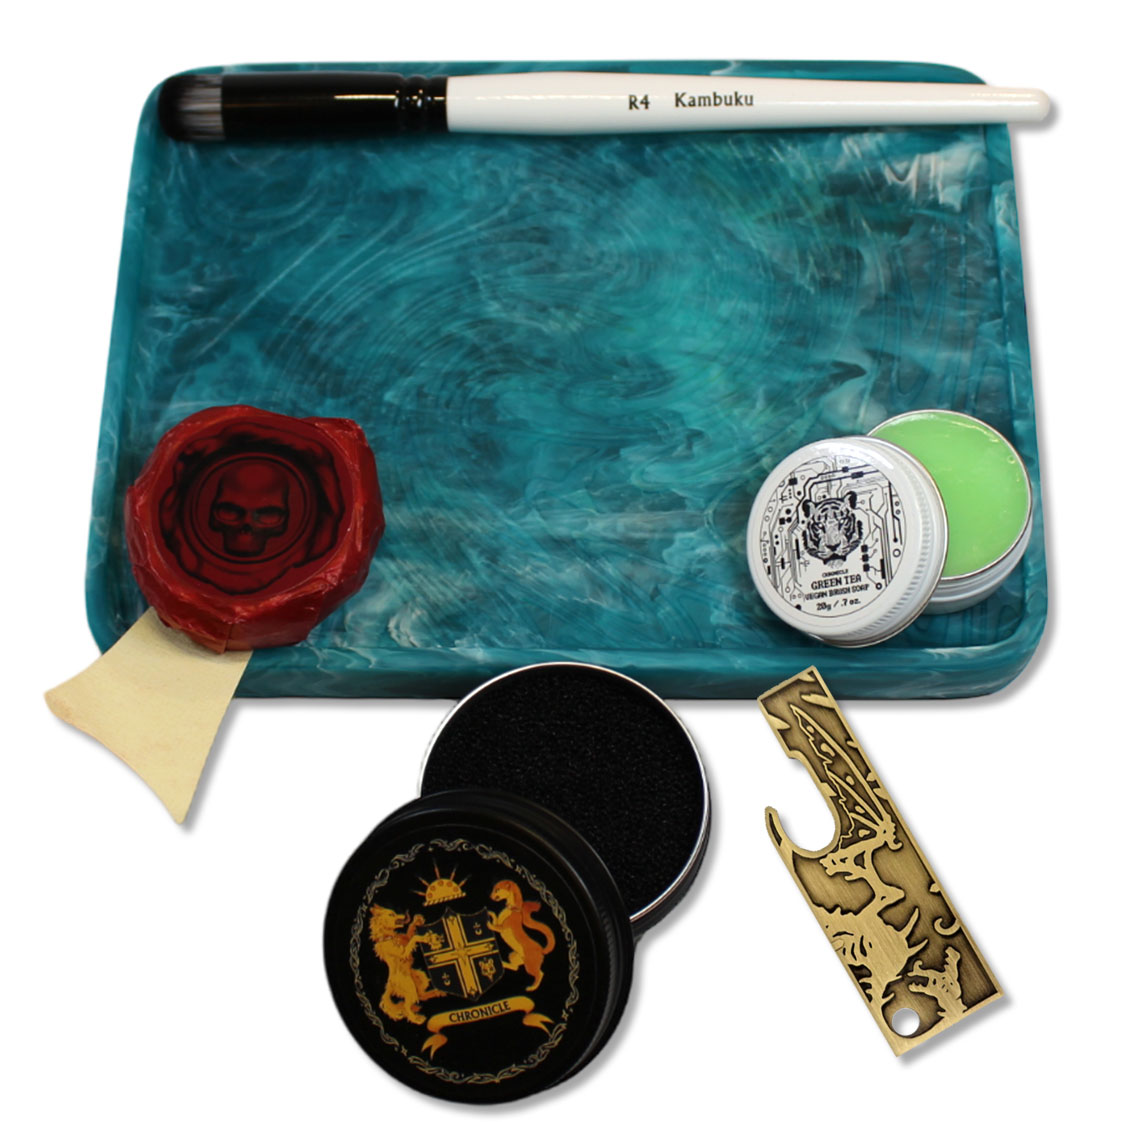 The accessories of Chronicle Cards Teflon Tiger Drybrushes Kickstarter campaign 